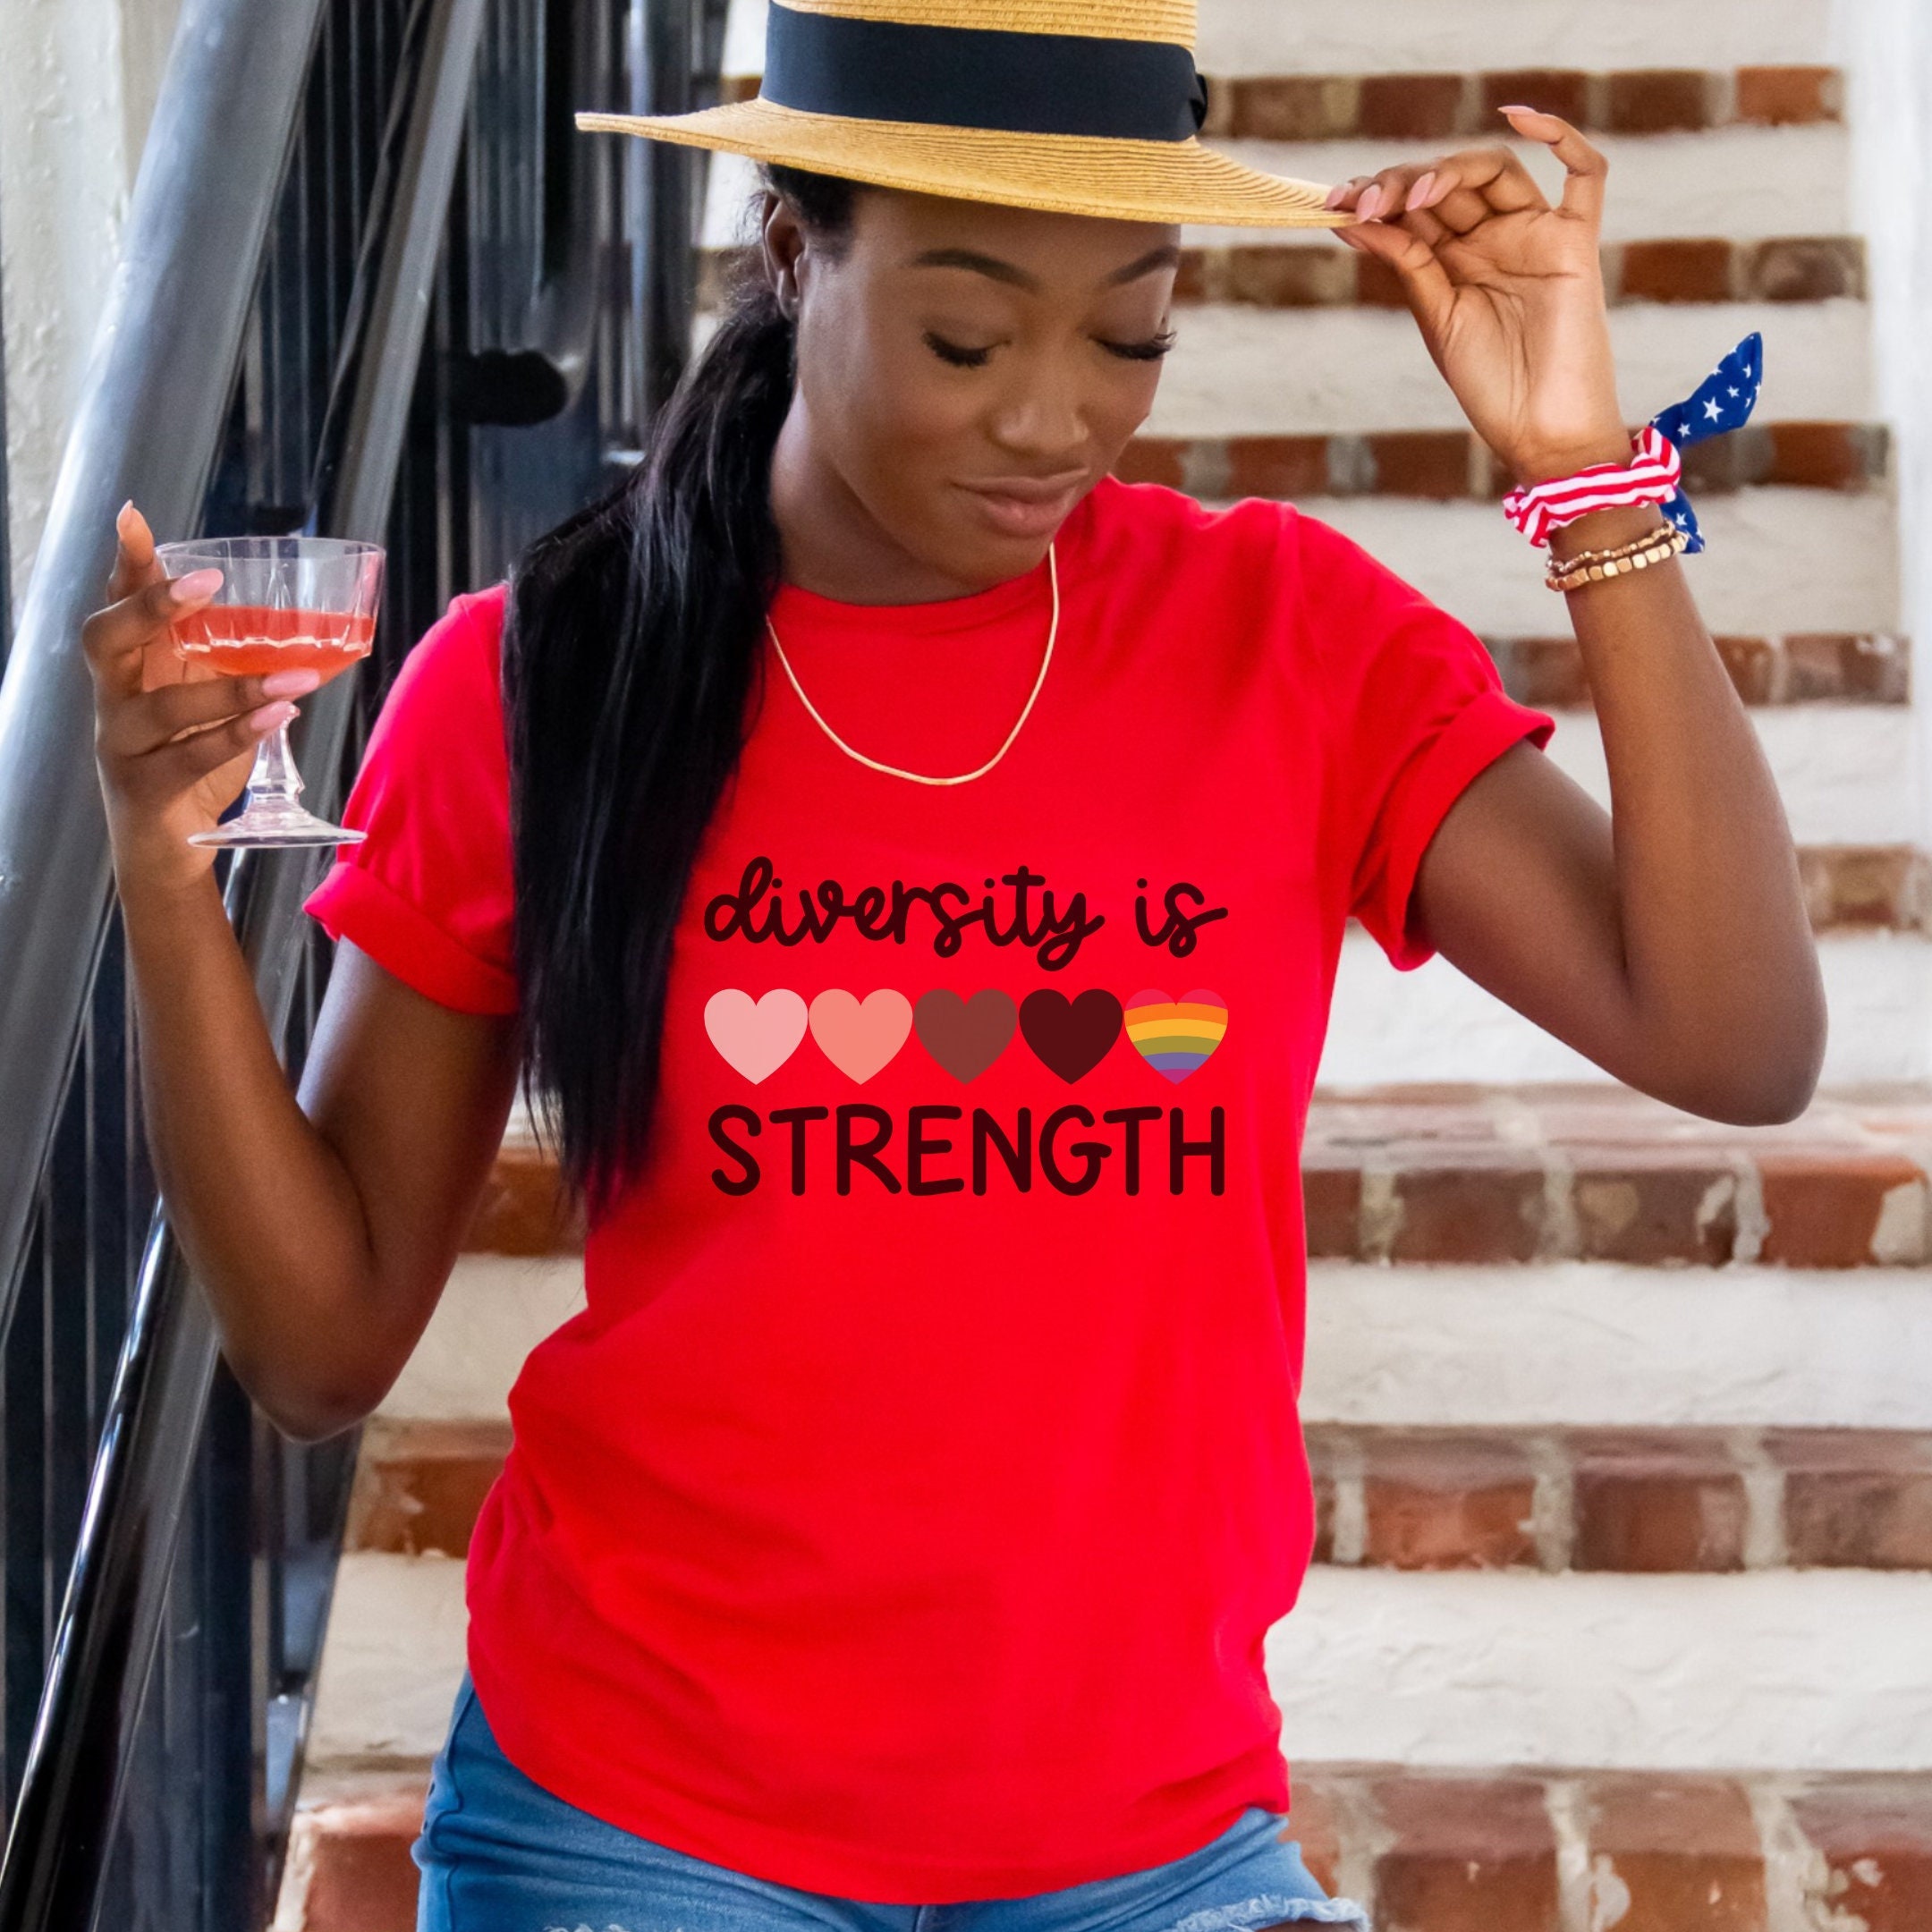 Diversity is Strength T-shirt - red or white options, available in plus  size S-4XL